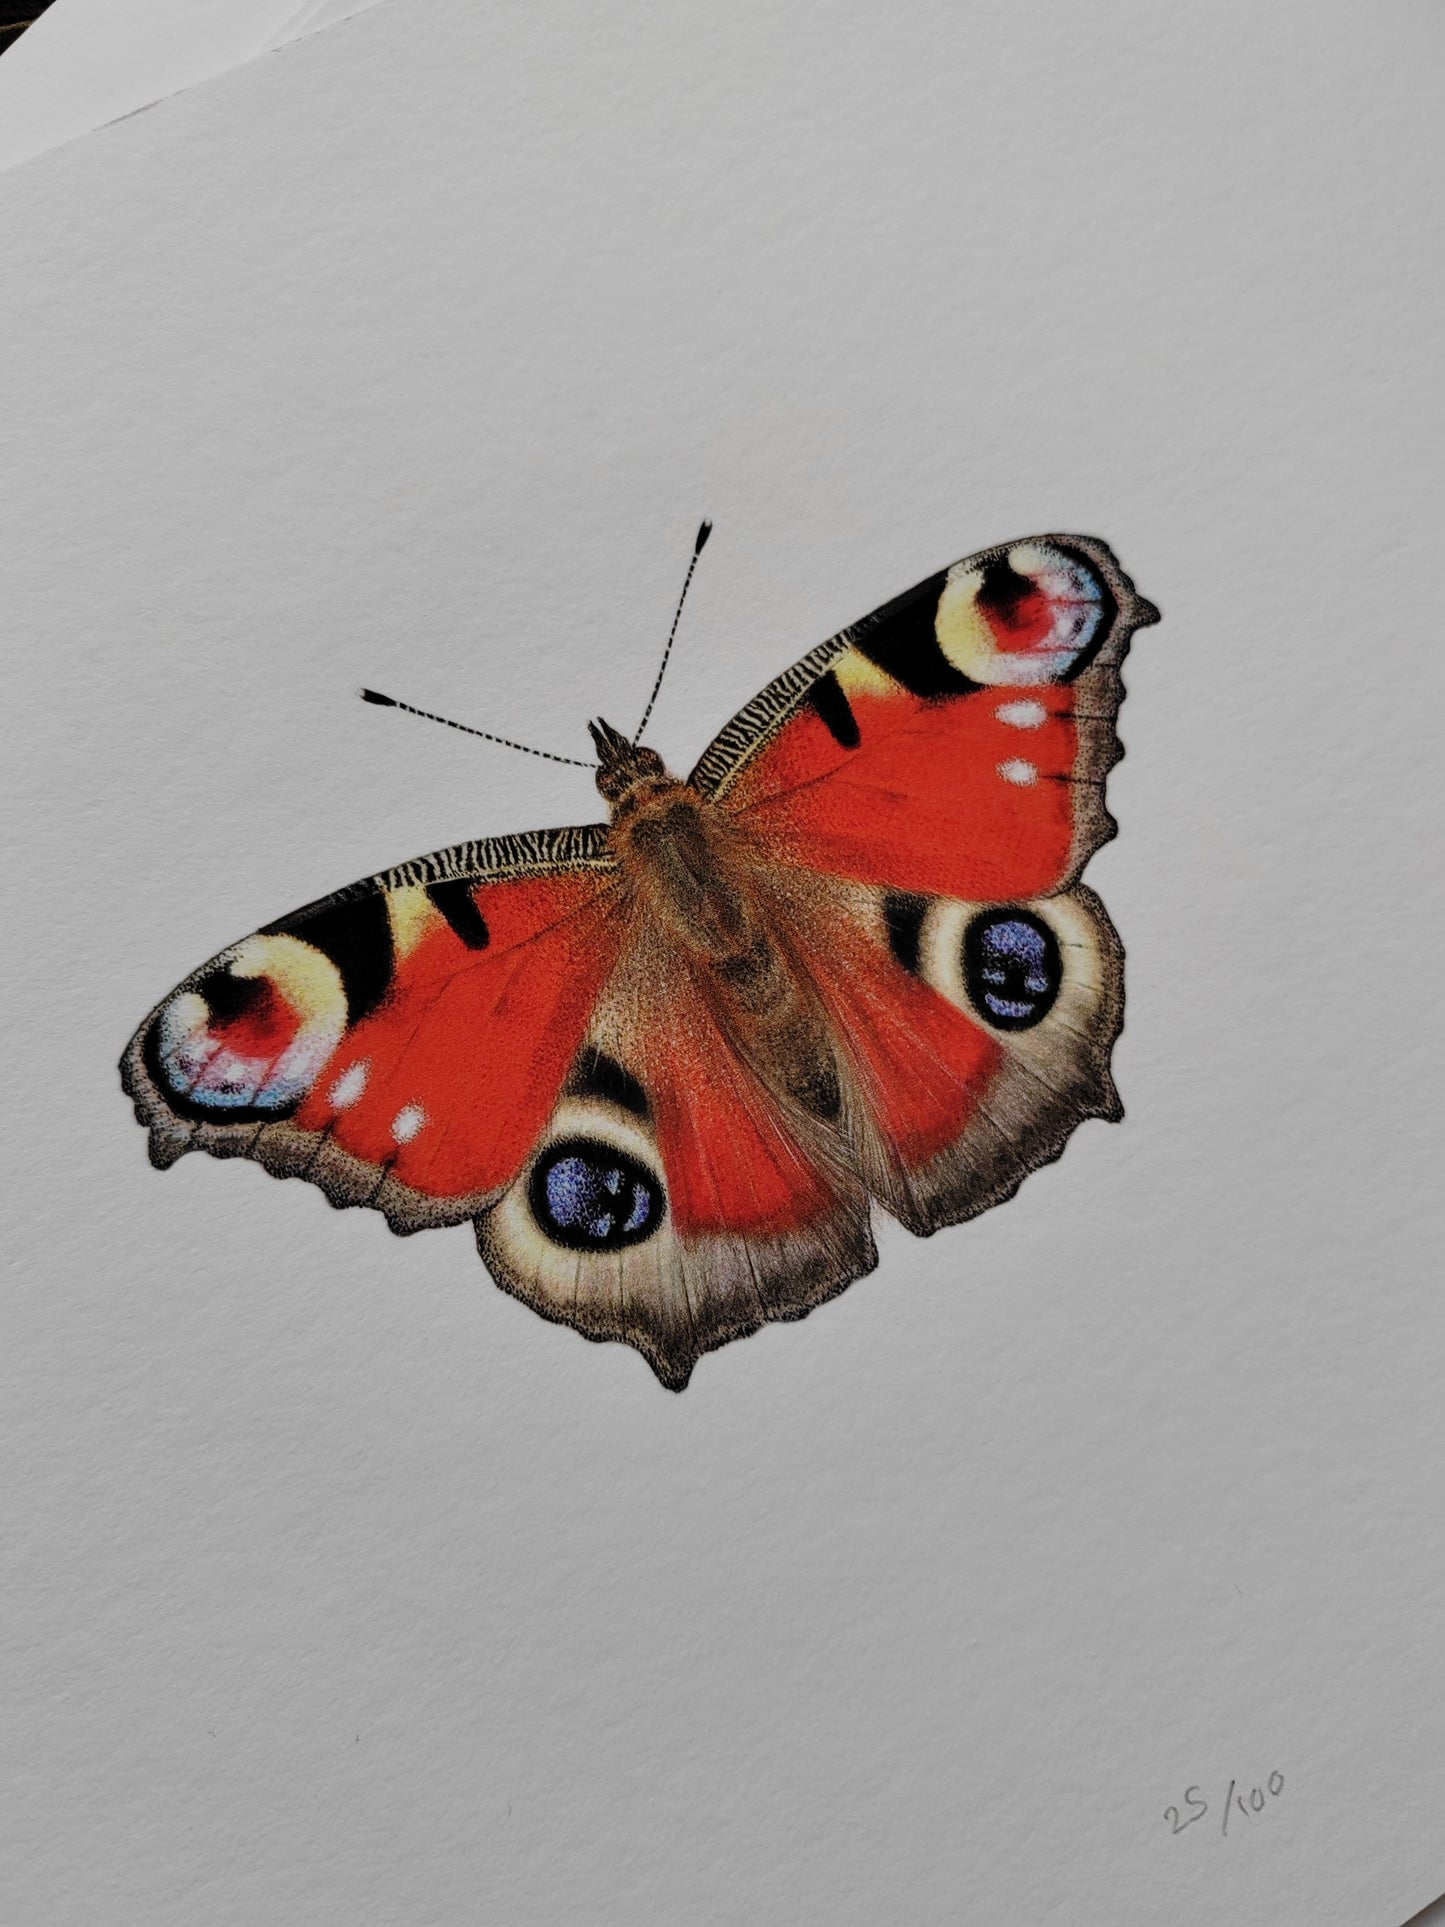 Peacock Butterfly, limited edition art print, Aglais io A4 size